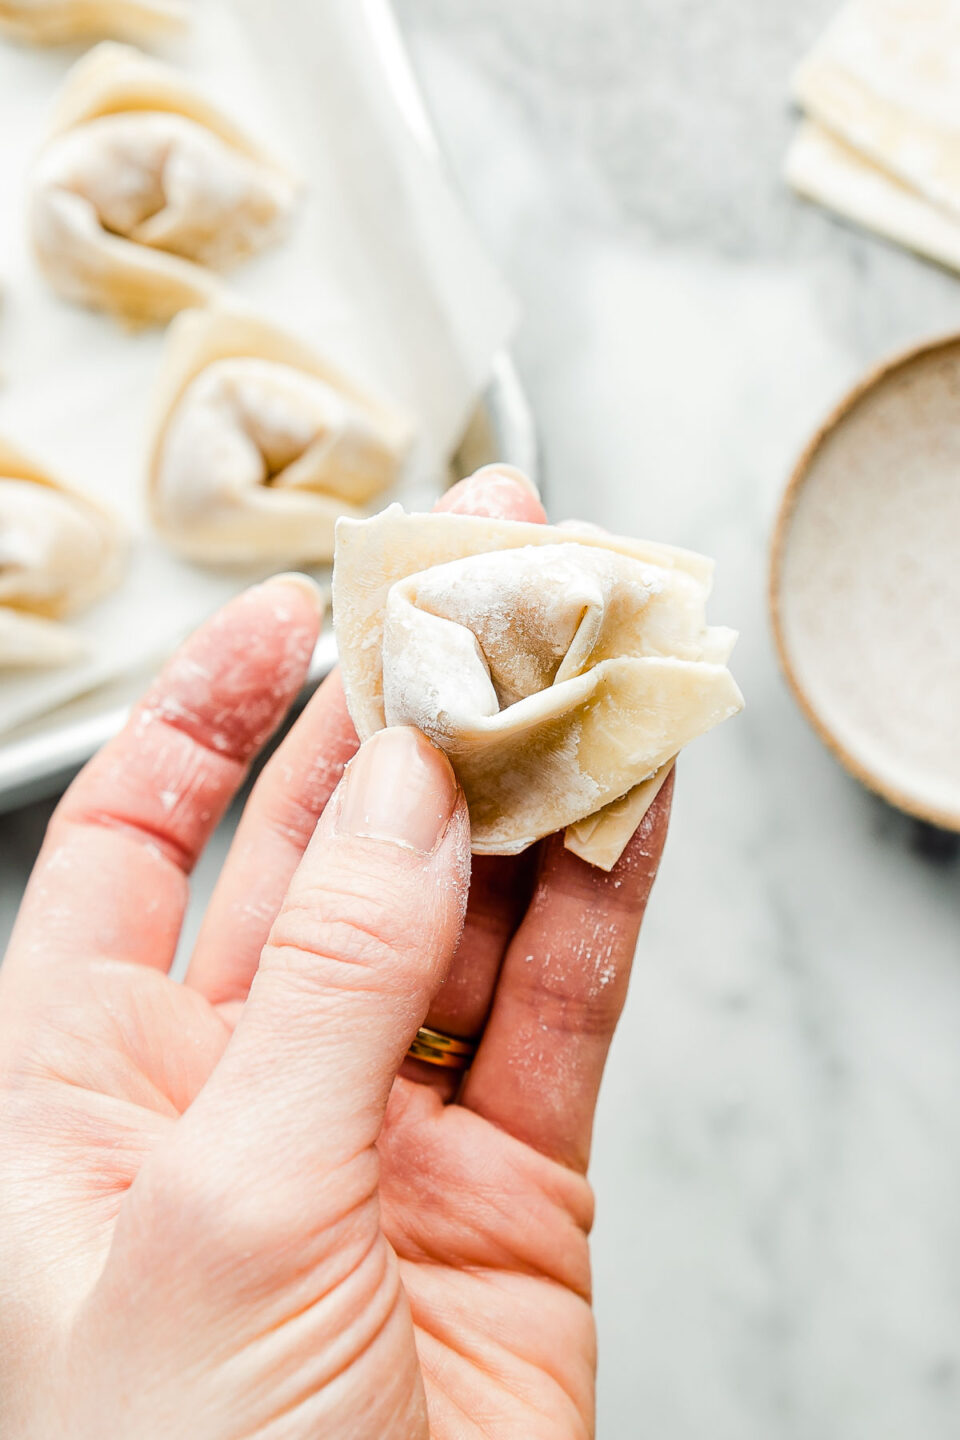 An overhead shot of a hand holding a folded wonton. A tray of prepared wontons, extra wrappers & a dish of water can be seen in the background on a white marbled surface.